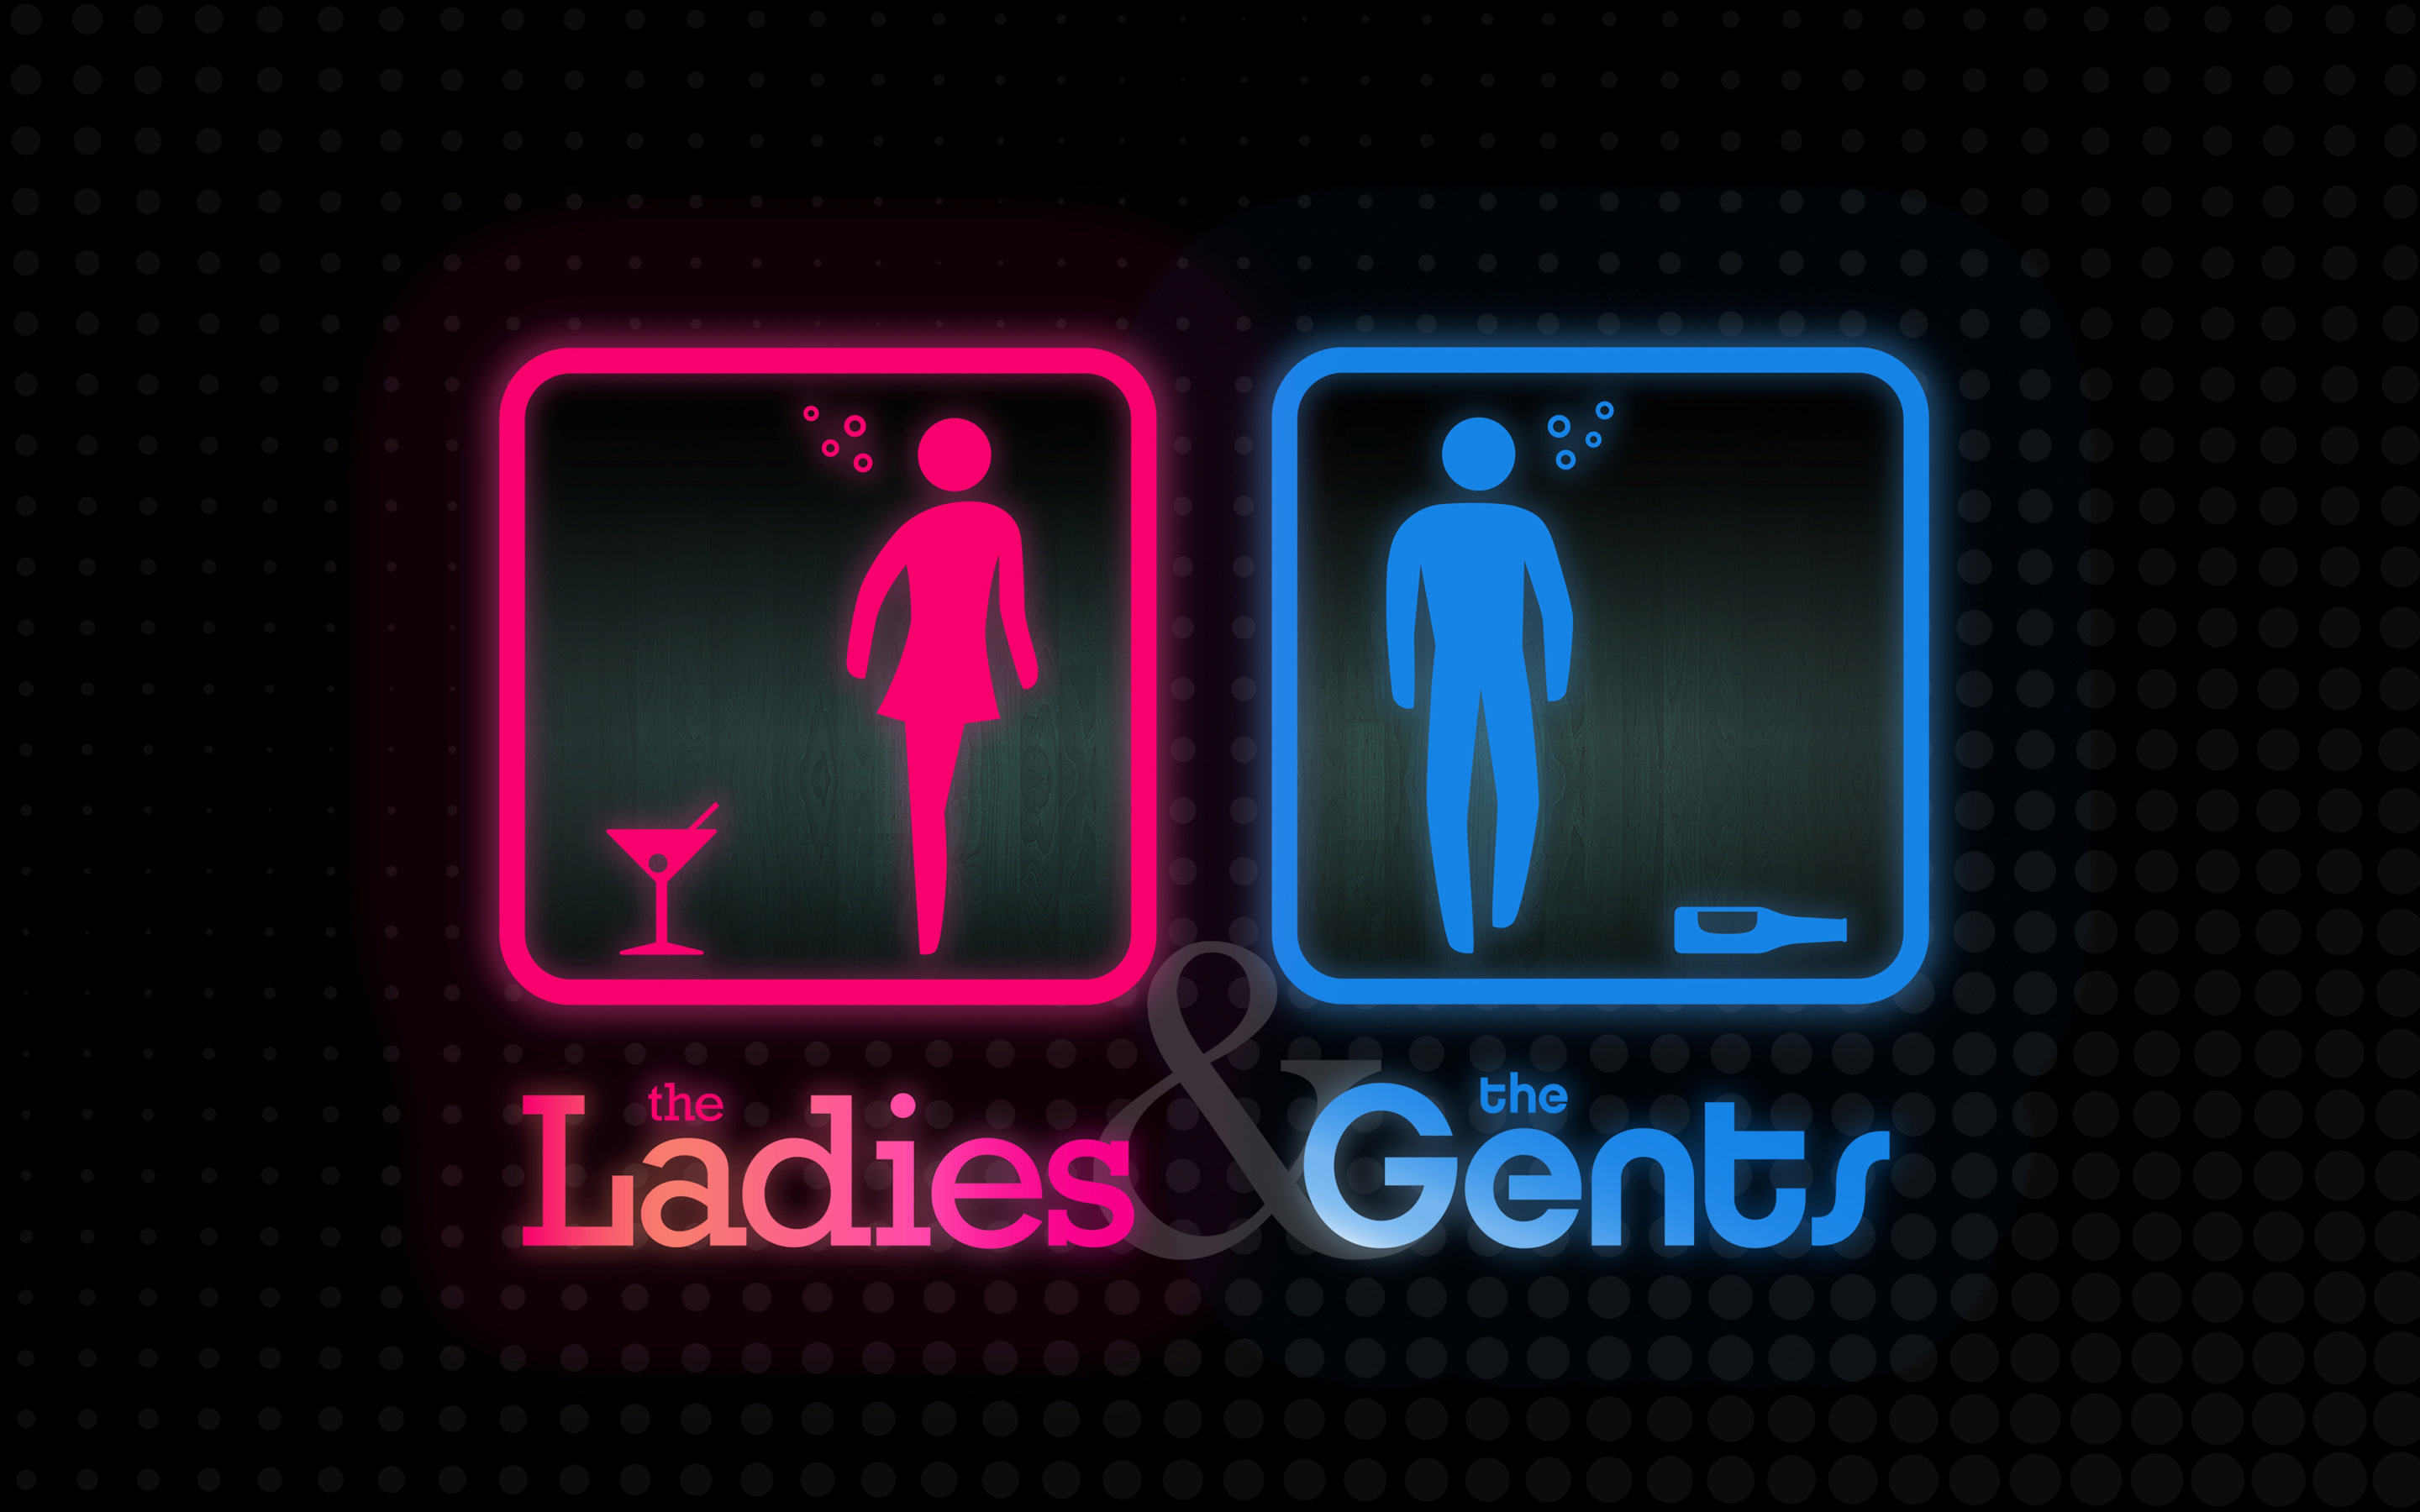 The Ladies and The Gents